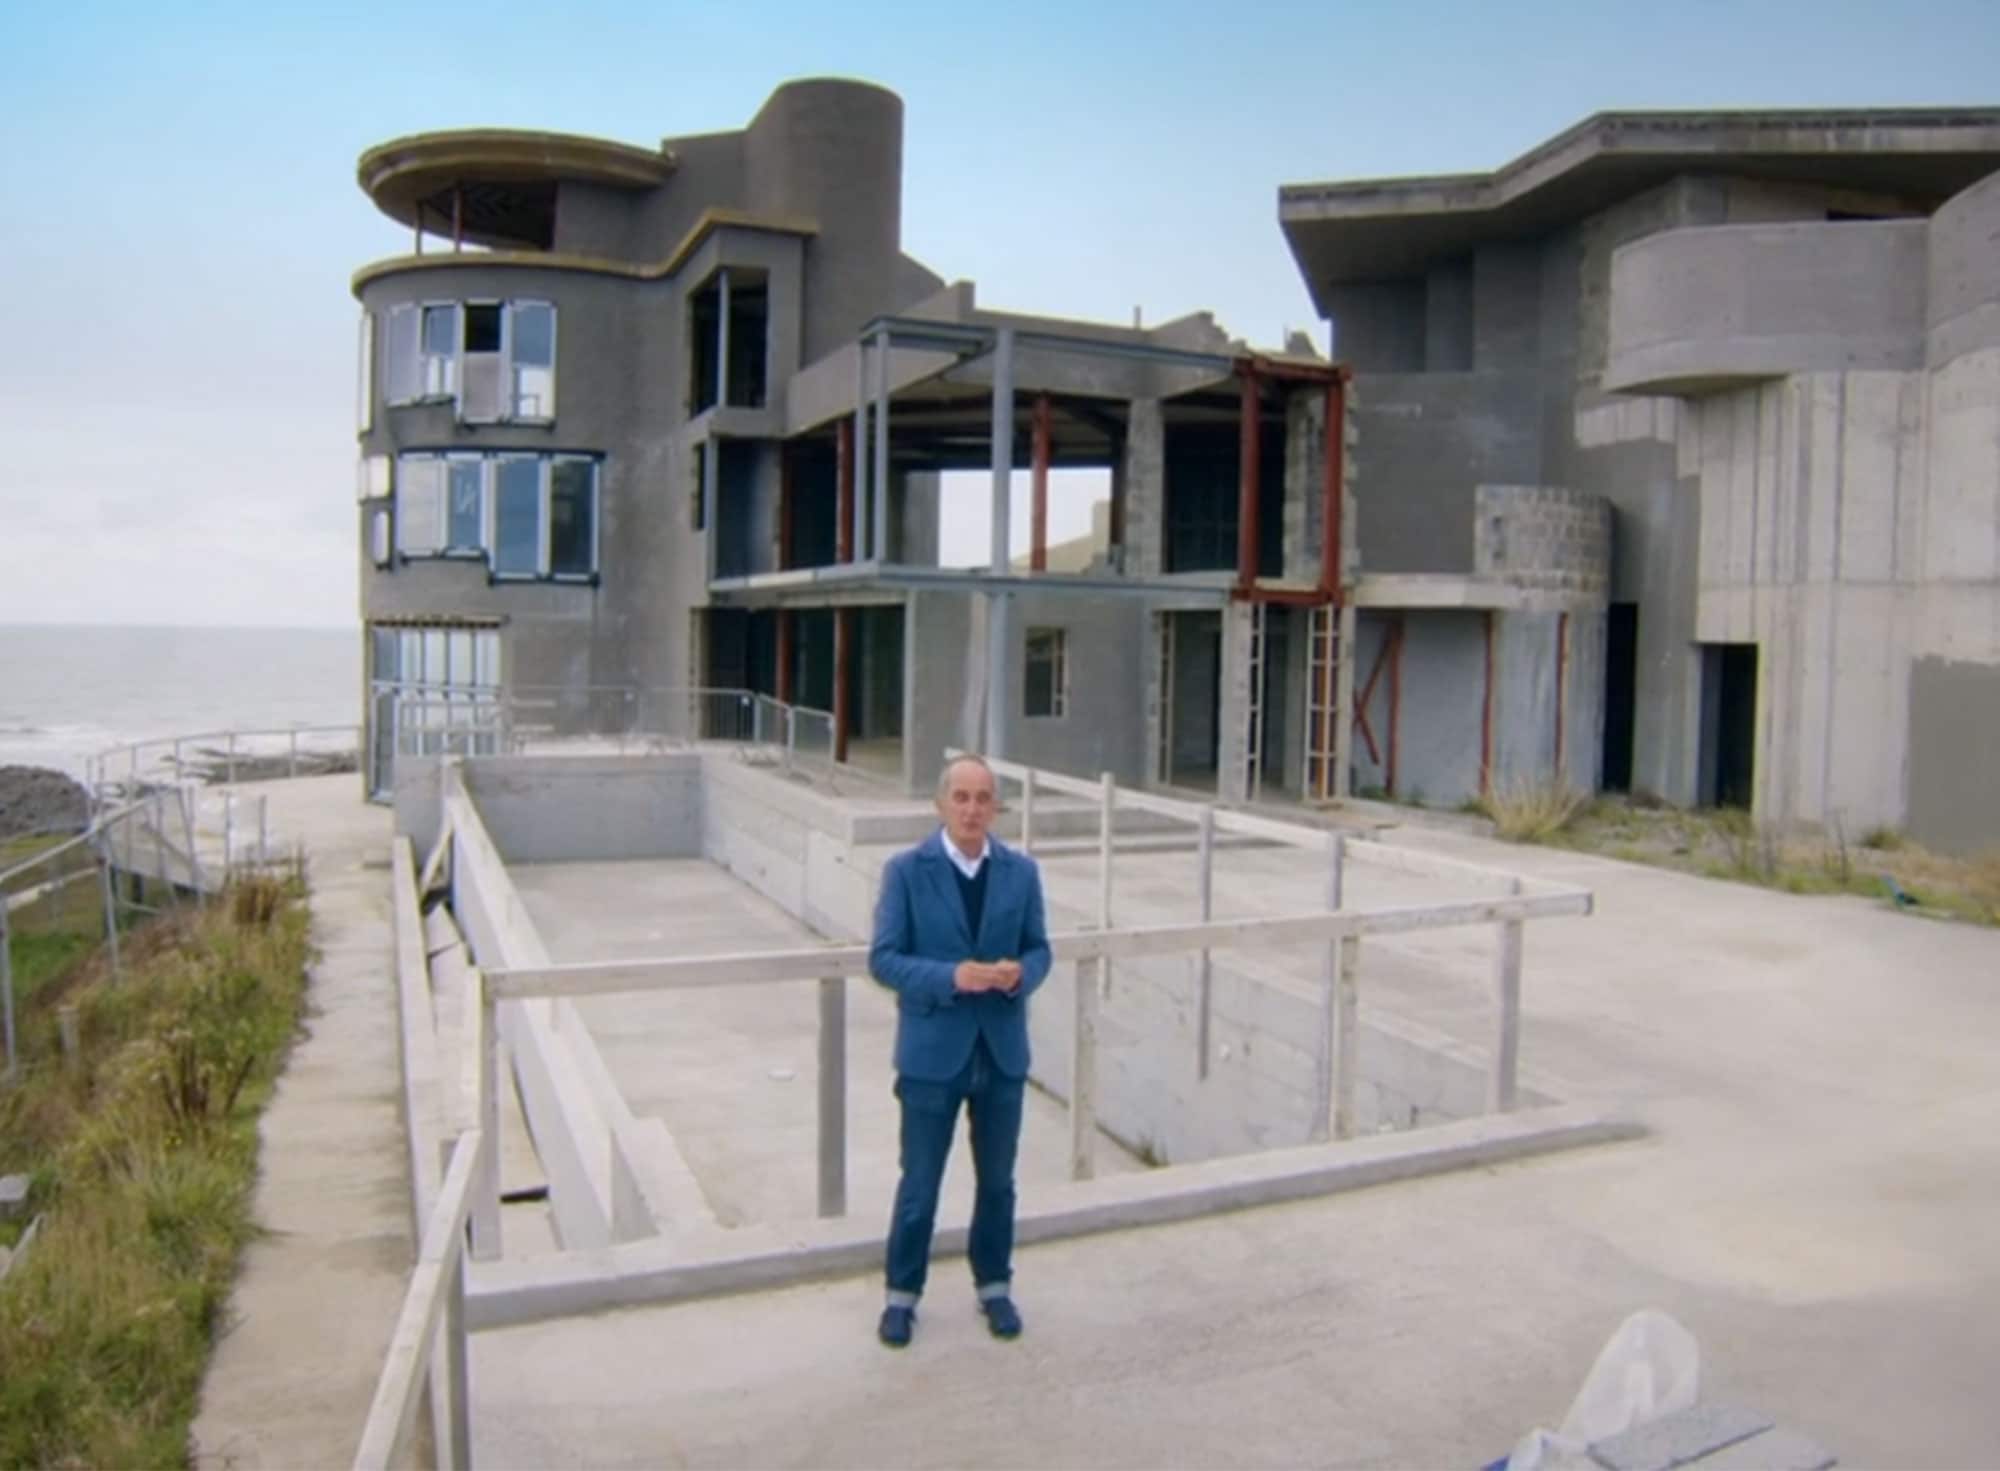 Kevin McCloud outside of a derelict house